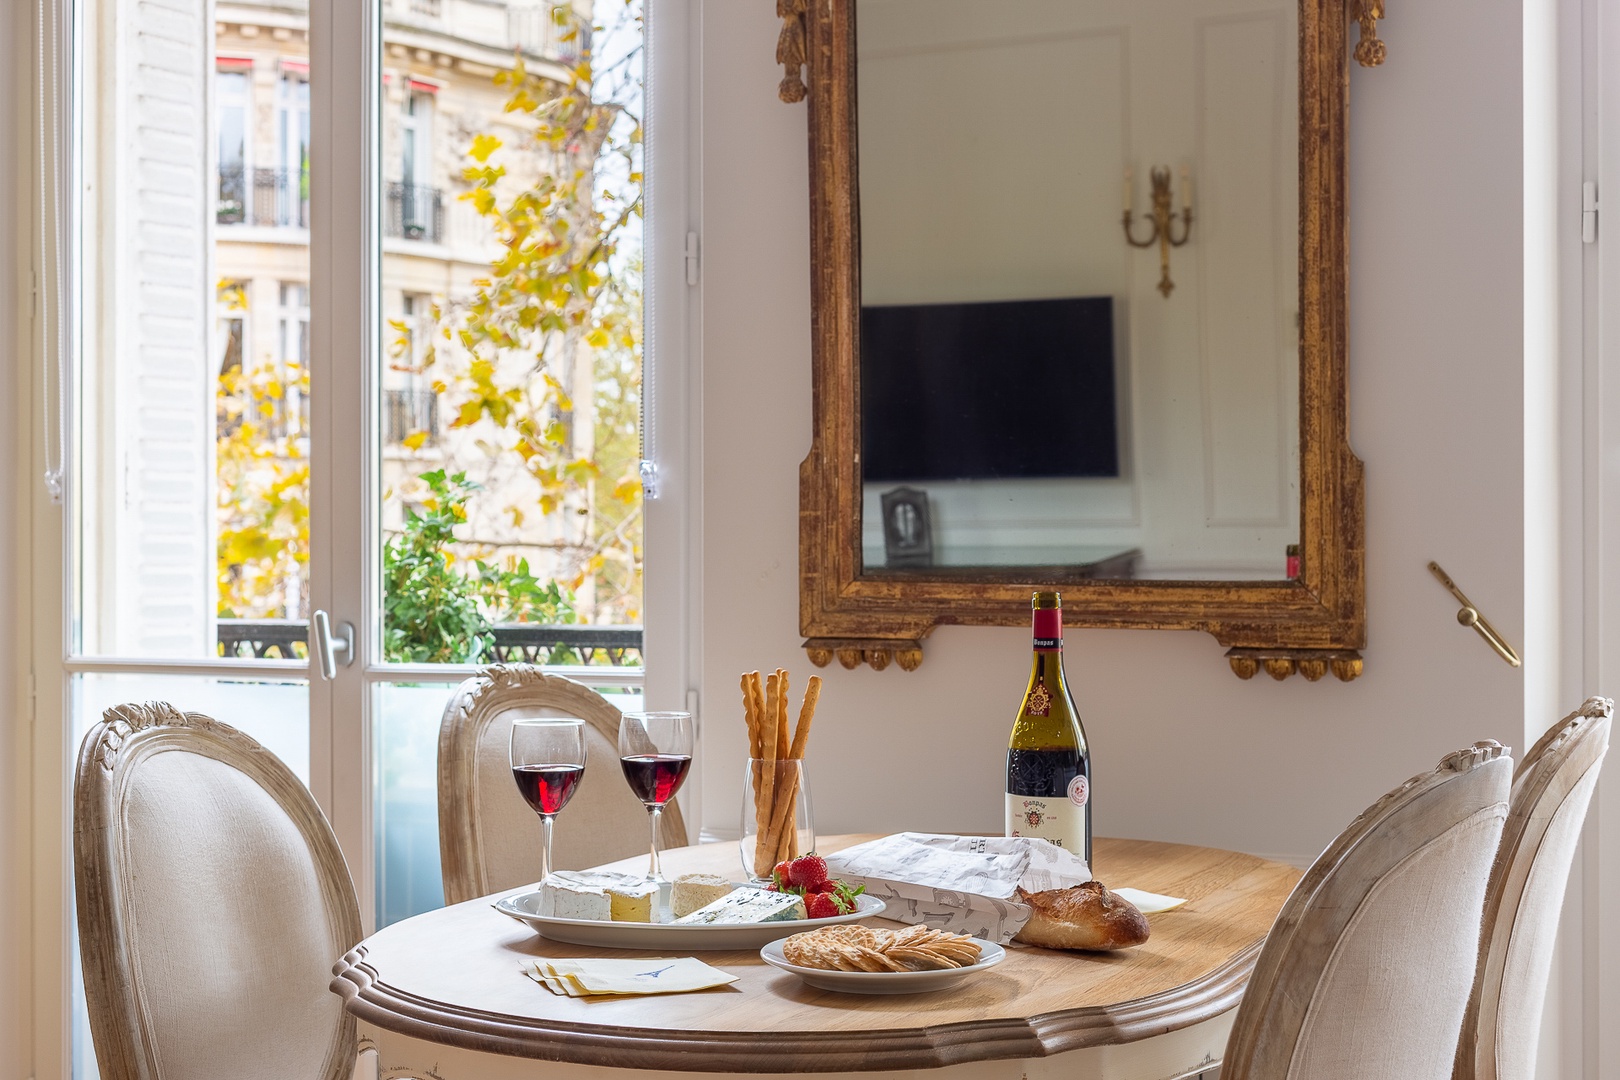 Enjoy dining in the comfort of home at the Saint Julien.